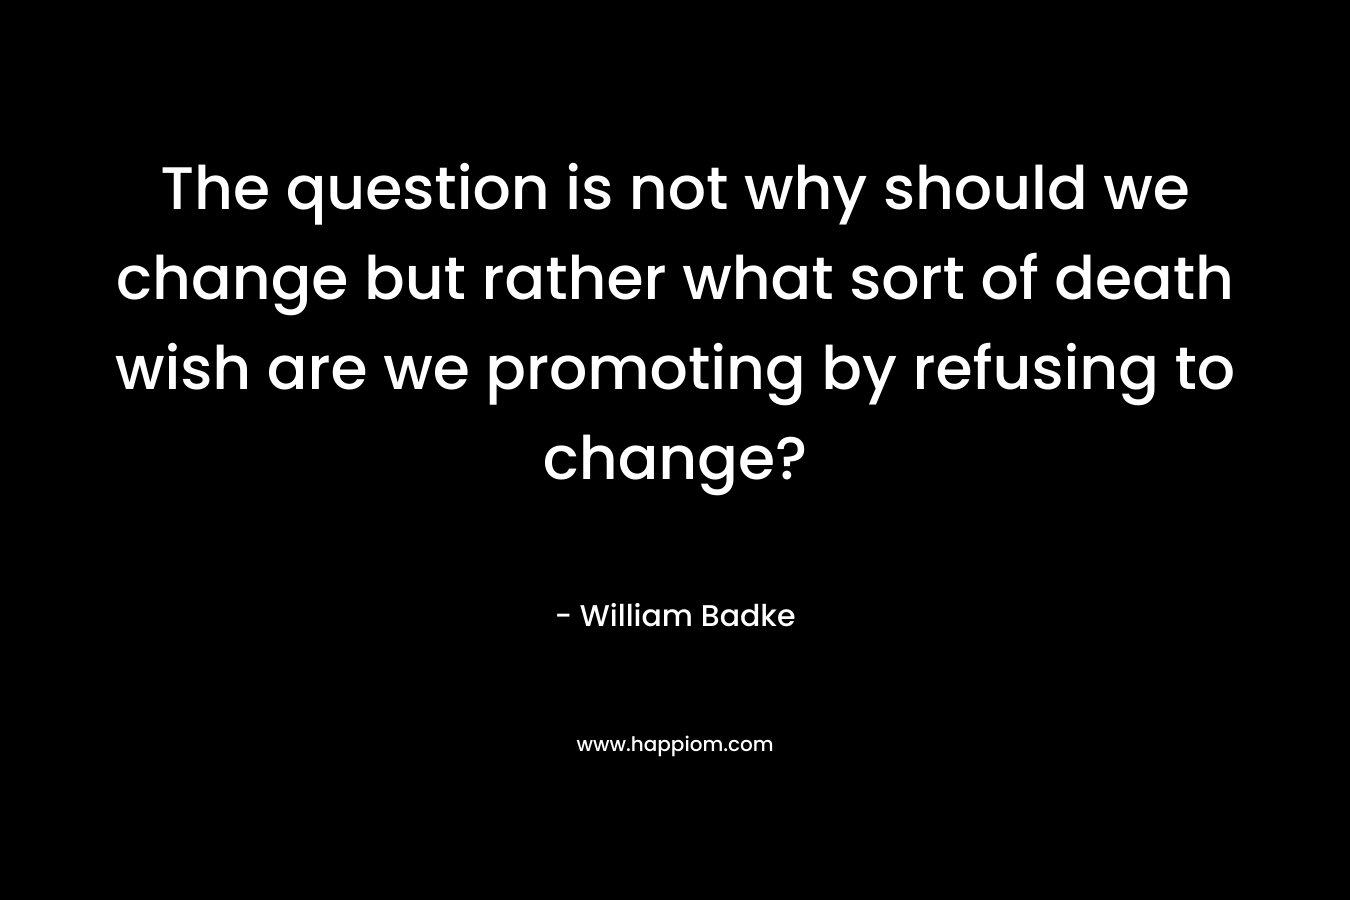 The question is not why should we change but rather what sort of death wish are we promoting by refusing to change?